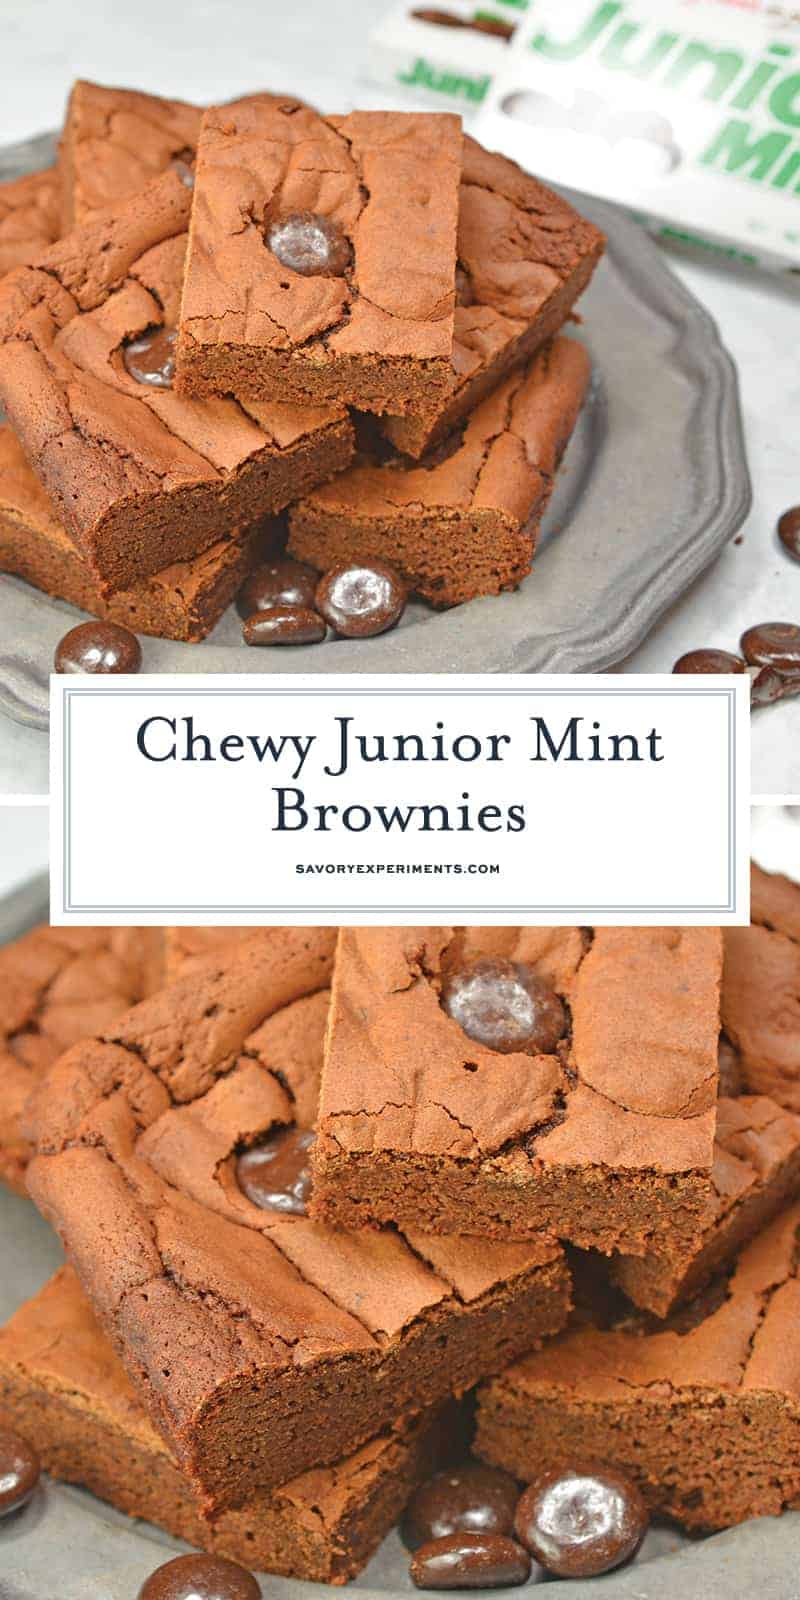 Junior Mint Brownies are homemade brownies blended with cool, creamy Junior Mints. This delicious chewy brownie recipe will satisfy any brownie cravings! #homemadebrownies #juniormints #chewybrownierecipe www.savoryexperiments.com